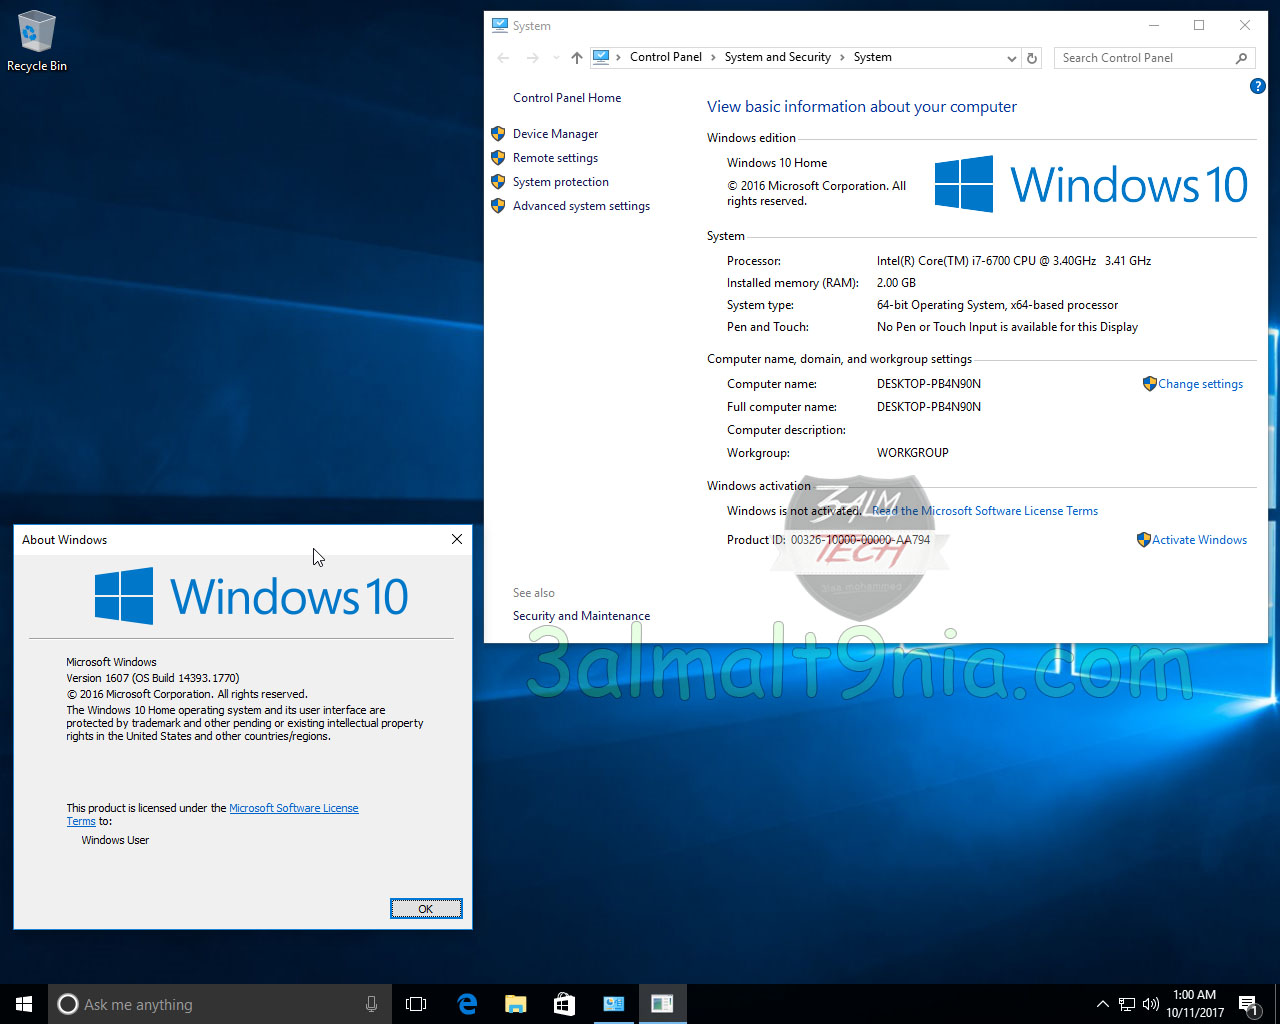 Windows 7-8.1-10 With Update (x86-x64) AIO [122in1] Adguard (v17 Free Downloadl